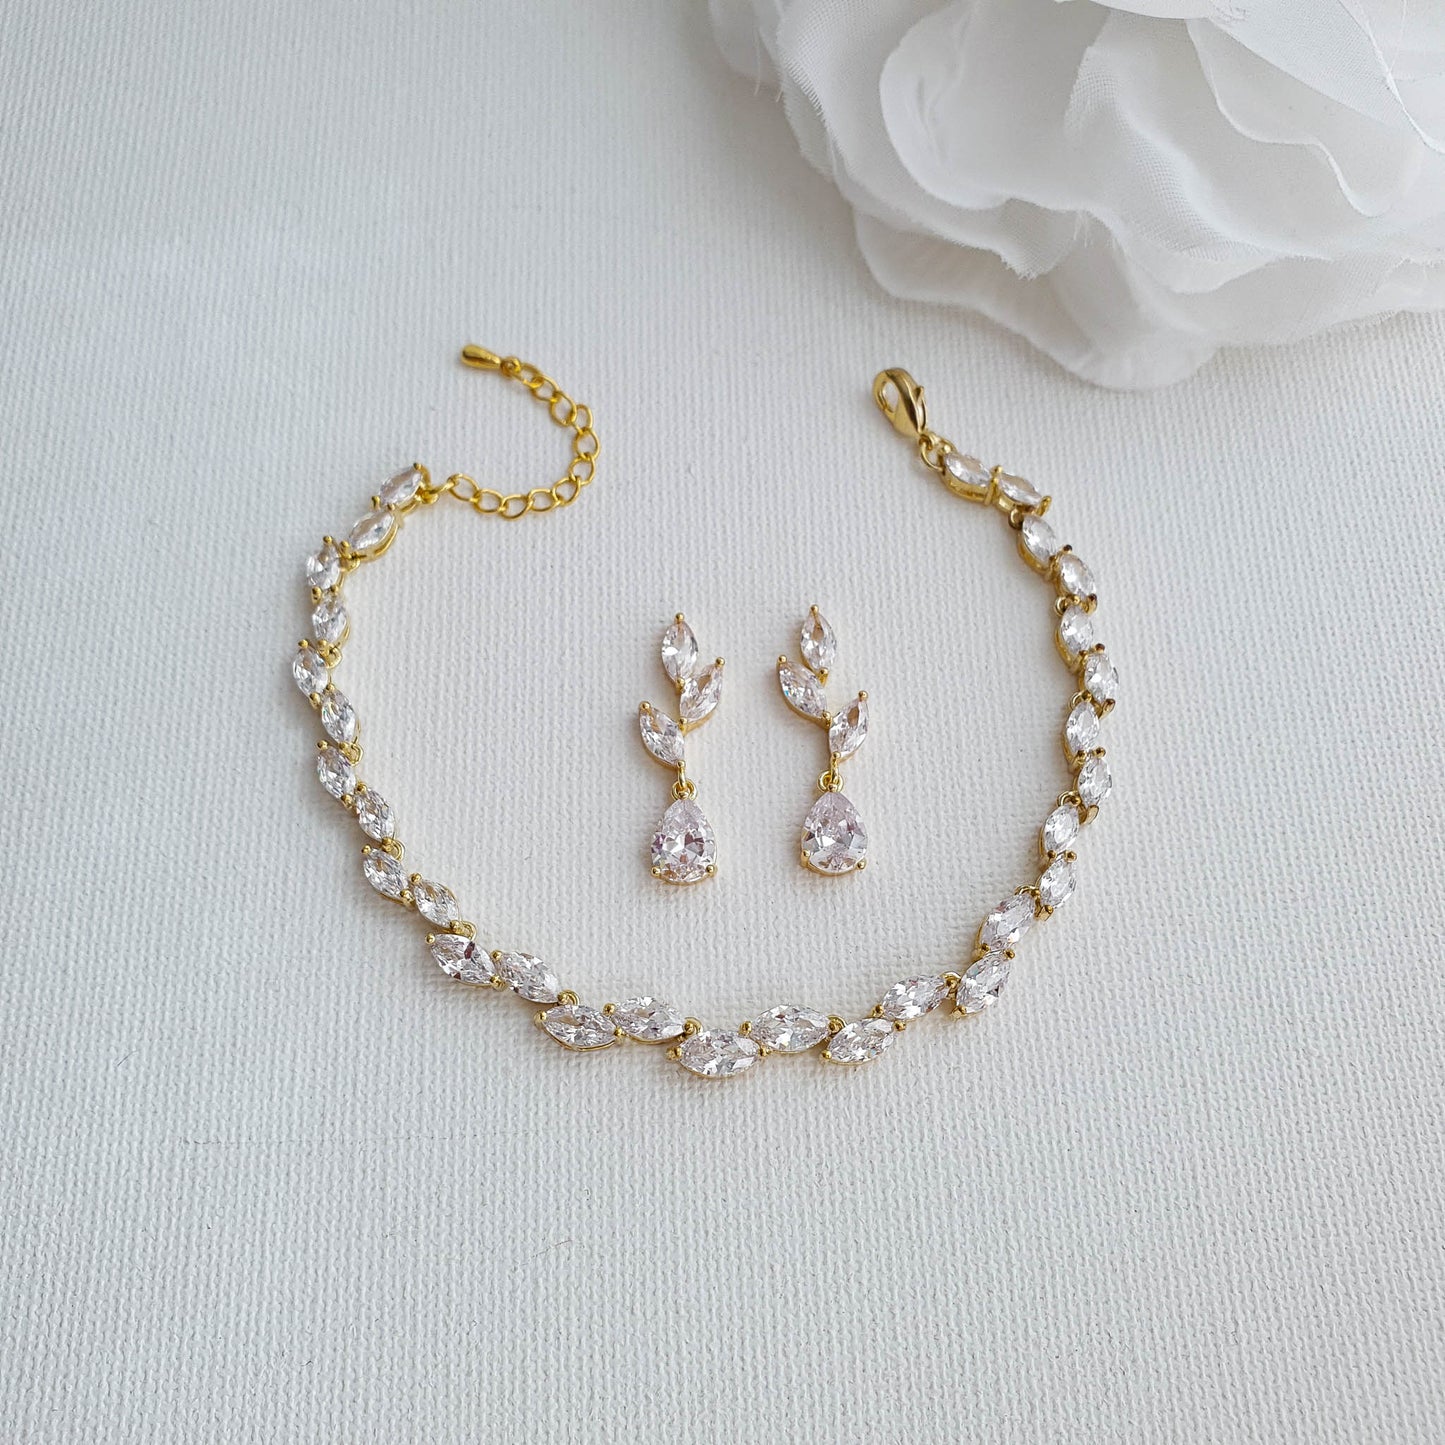 Rose Gold Bridal Party Jewellery Set-Taylor